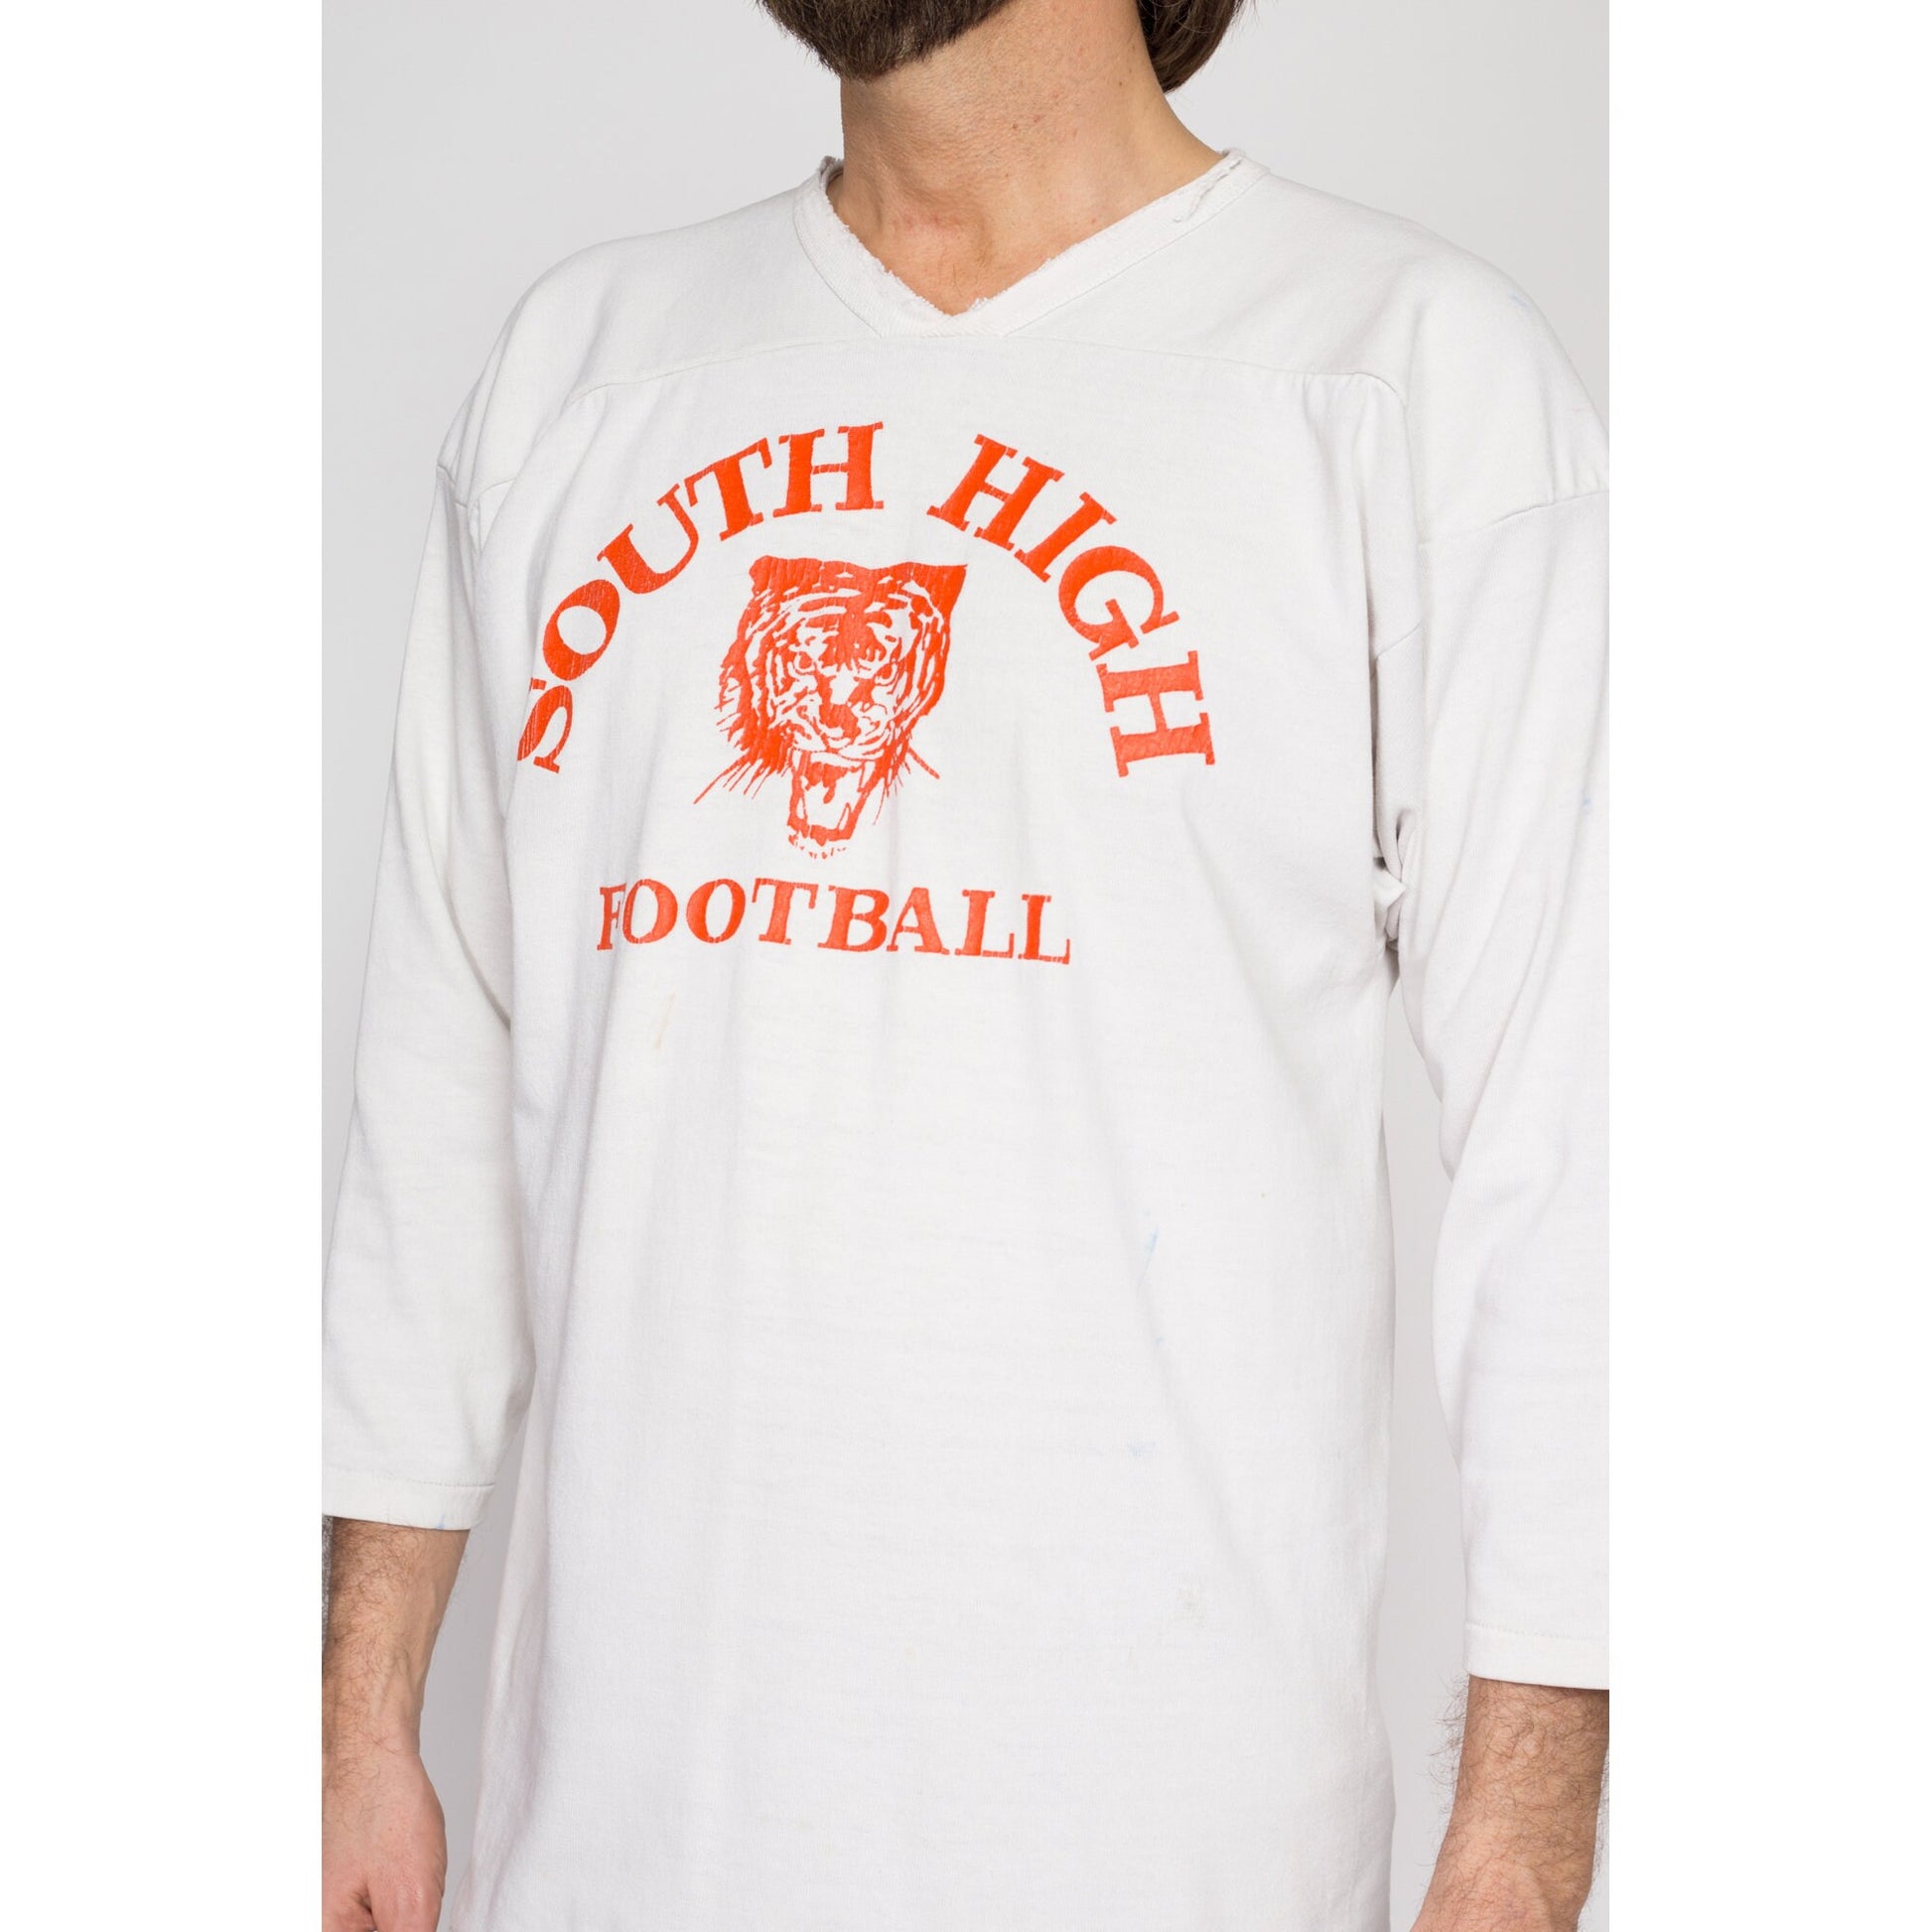 Large 60s South High Football Jersey | Vintage V Neck Cotton Knit Athletic Shirt